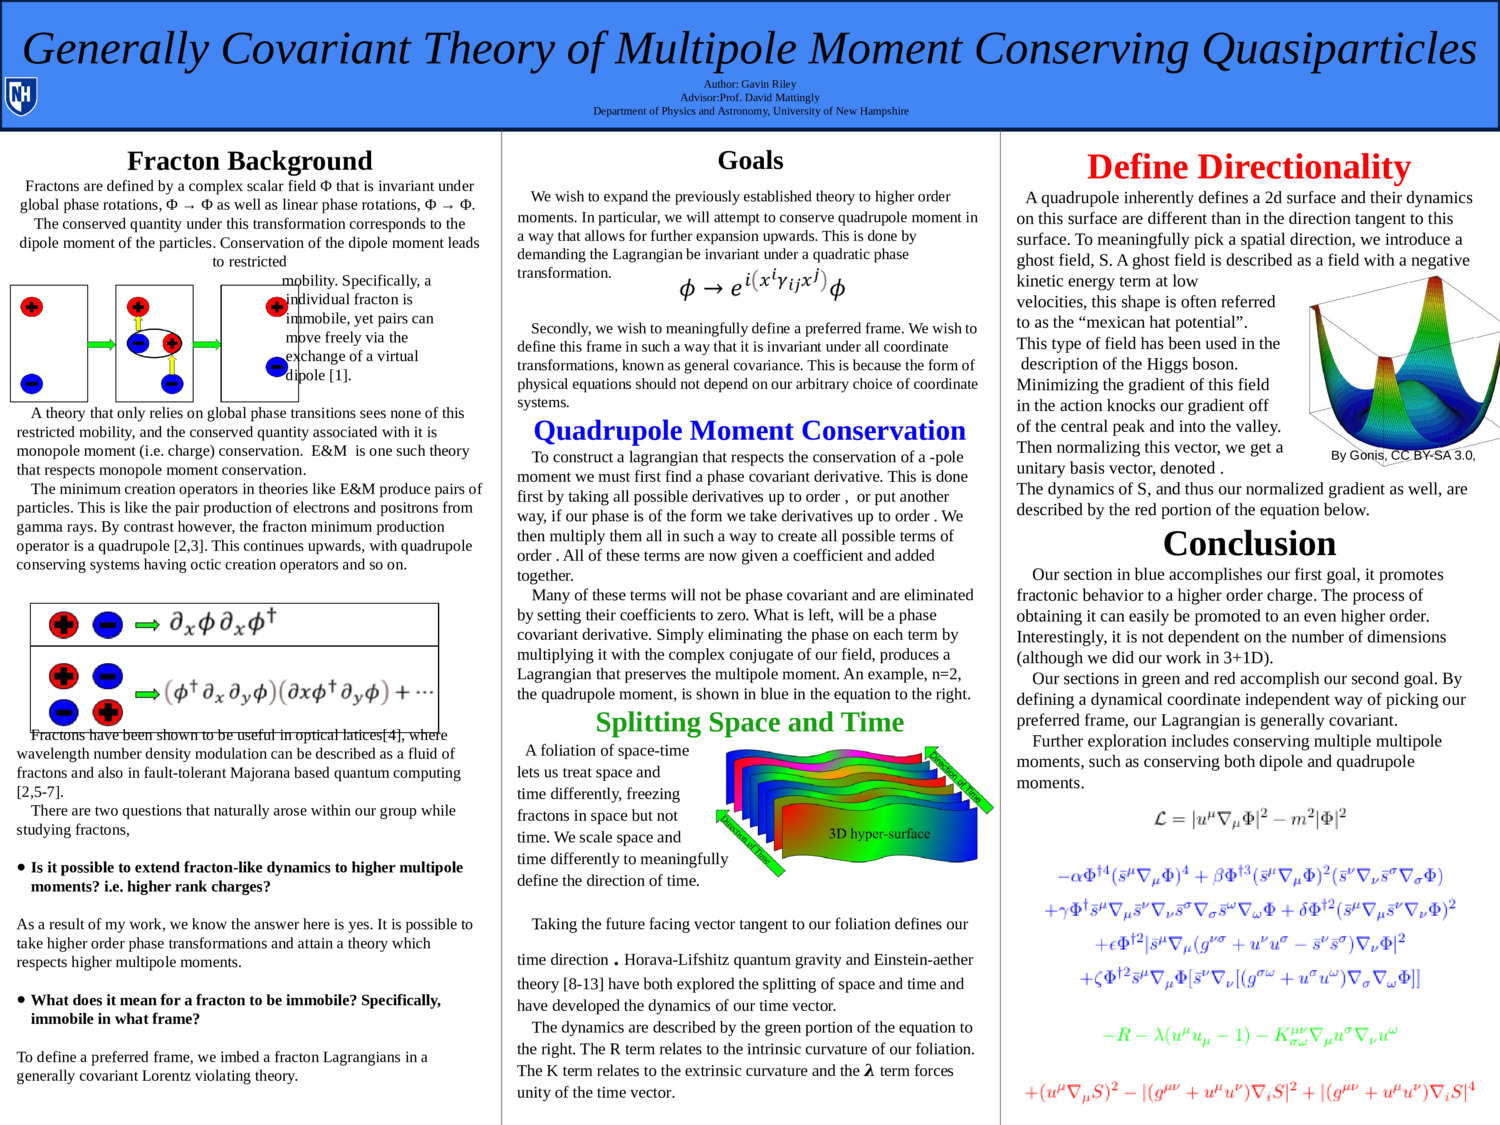 Generally Covariant Theory Of Multipole Moment Conserving Quasiparticles by ger1006